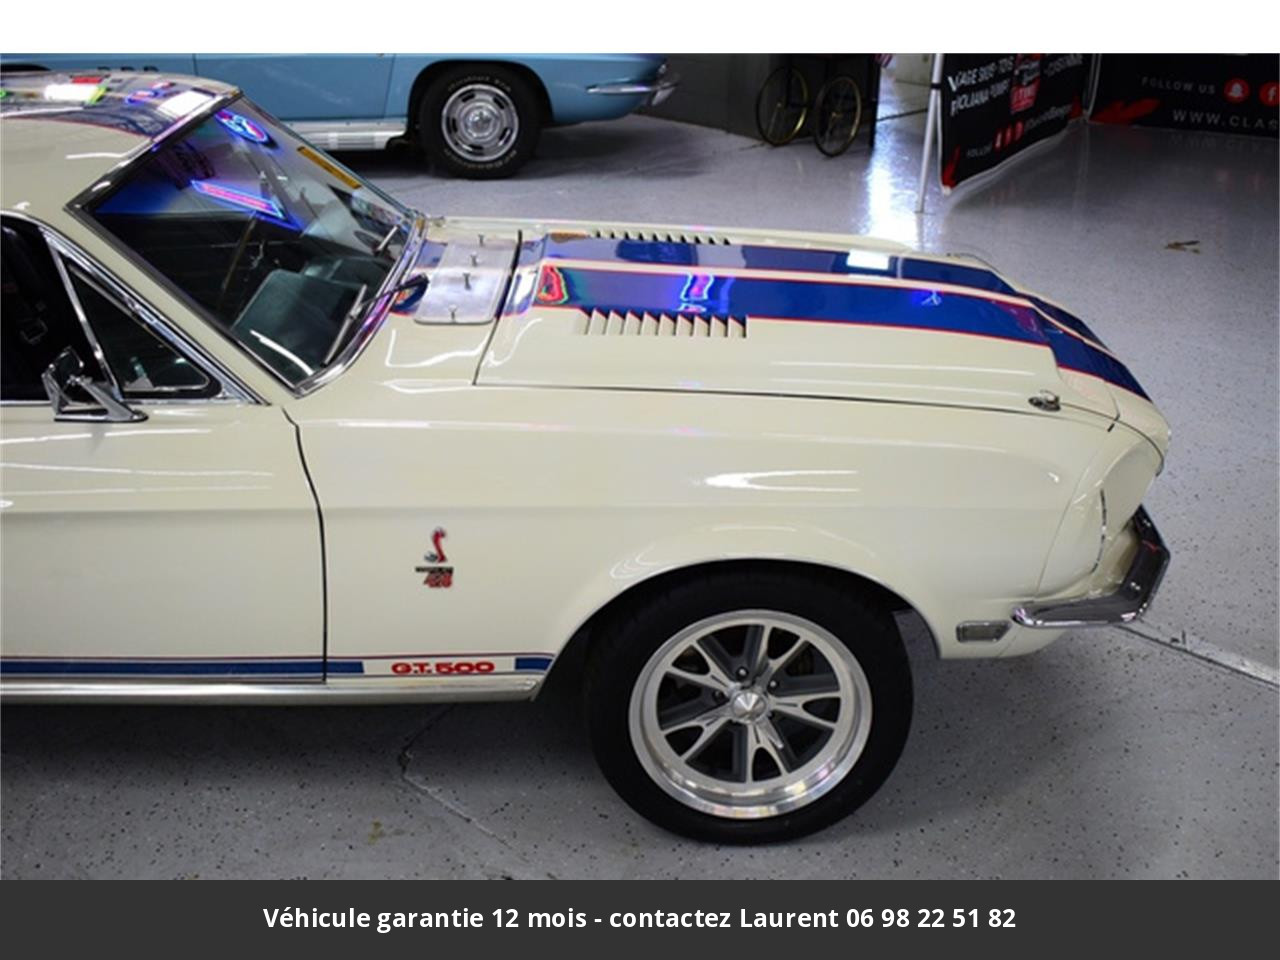 Ford Mustang Gt500 signée carroll shelby n° 1416 cobra le mans 390 ci  s code matching 1968 prix tout compris